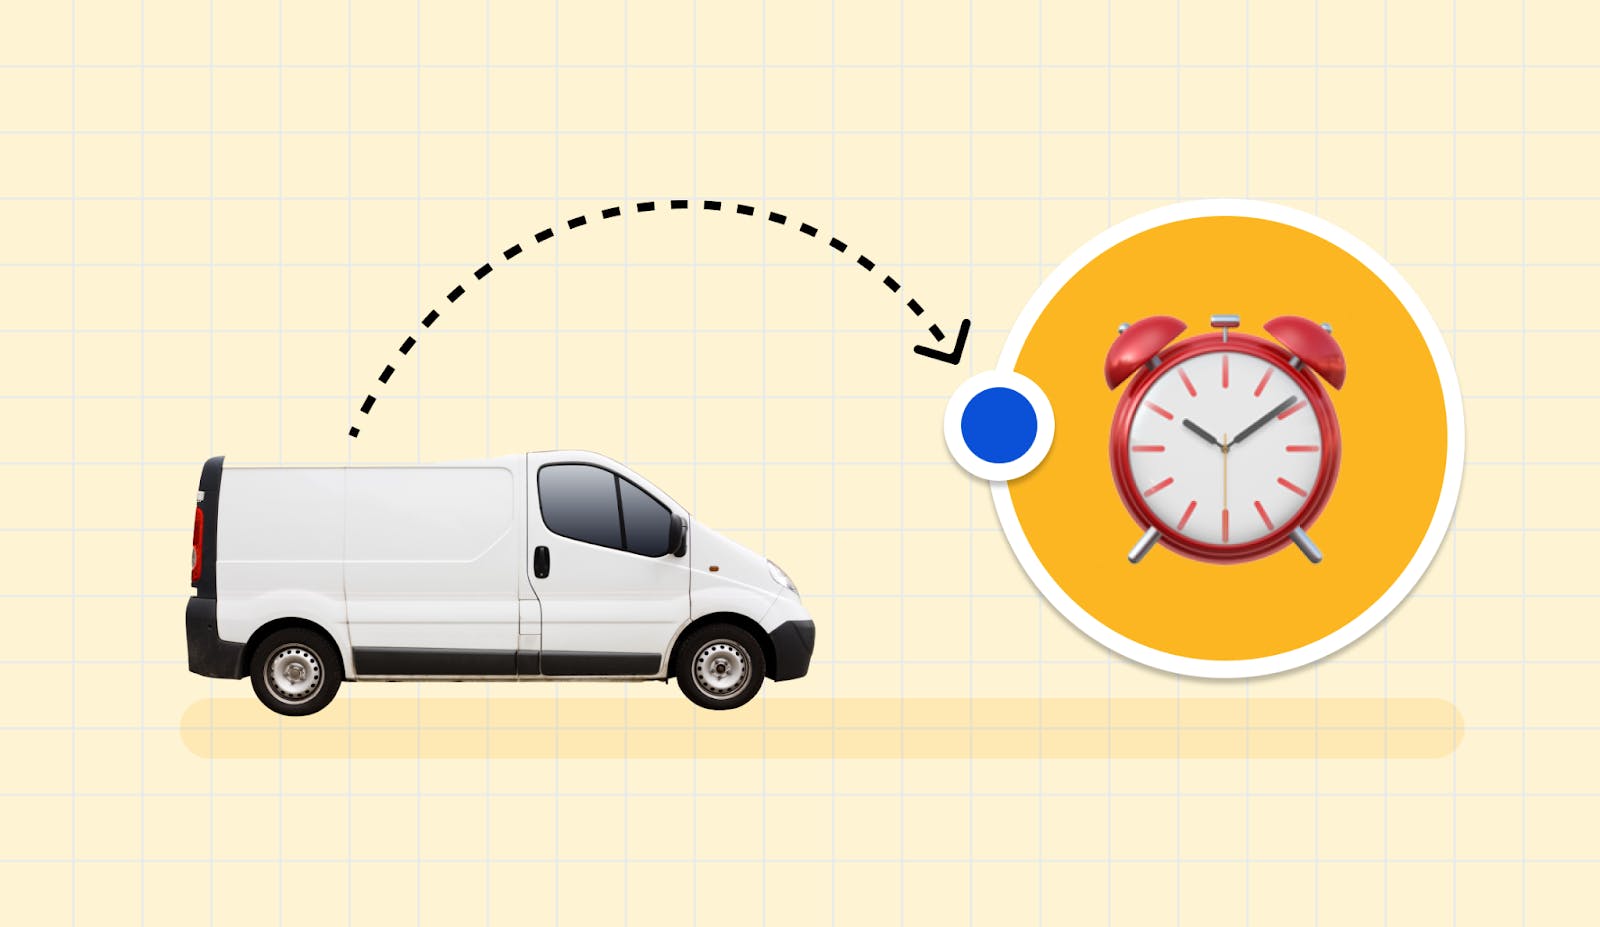 Delivery van with arrow pointing to a clock indicating an on time delivery